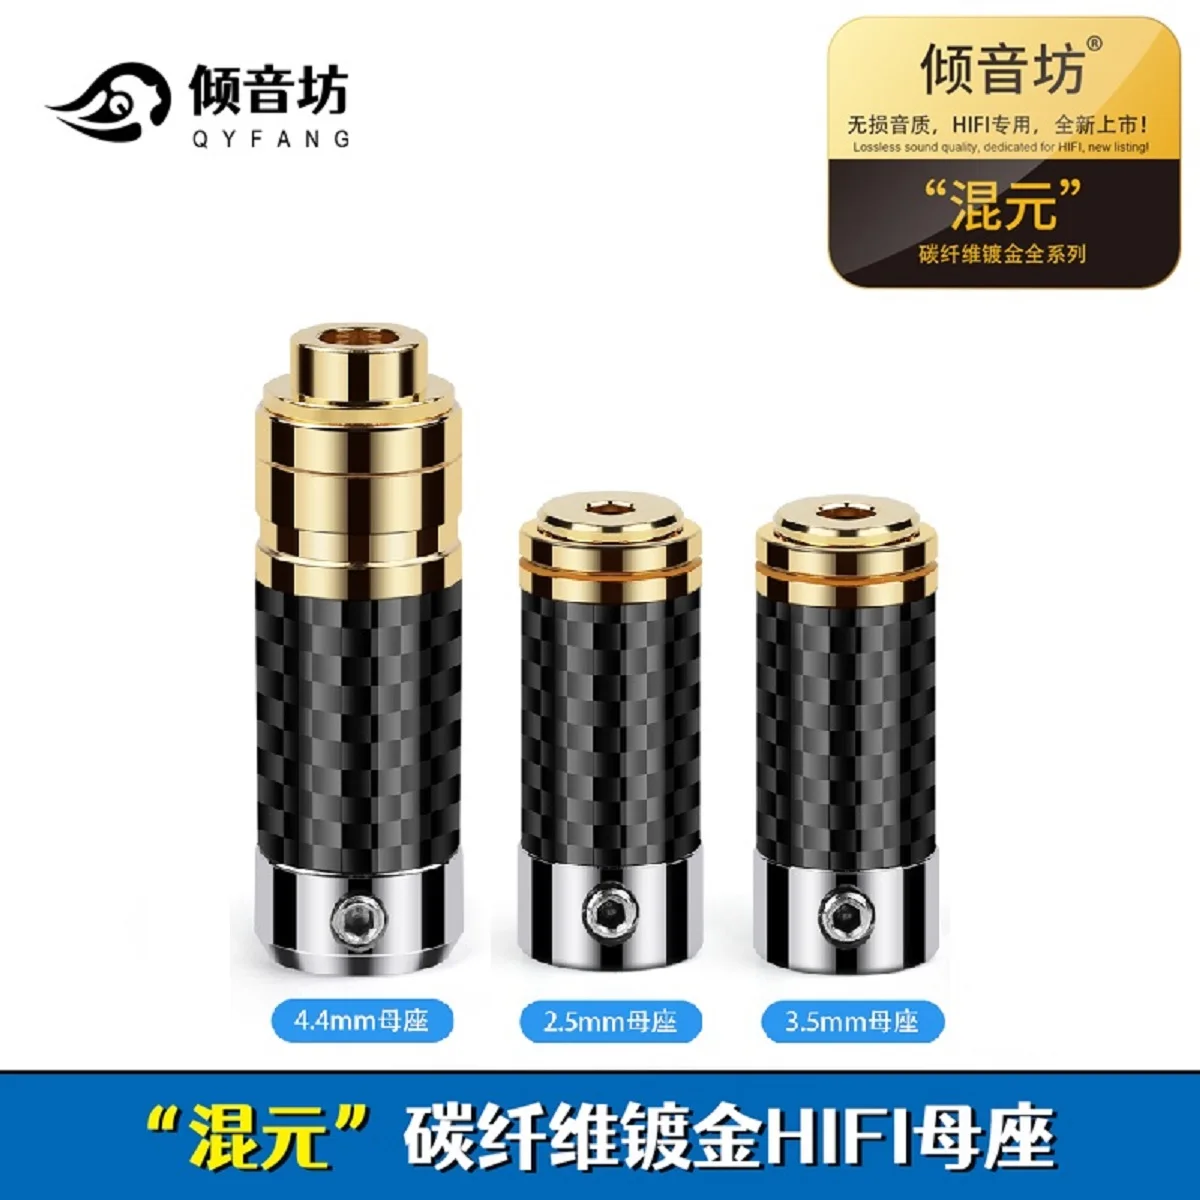 

QYFANG 2.5/3.5/4.4mm 4 Pole Earphone Female Plug 4-Layer Gold Plated Balance Audio Jack Headphone Wire Connector Metal Adapter